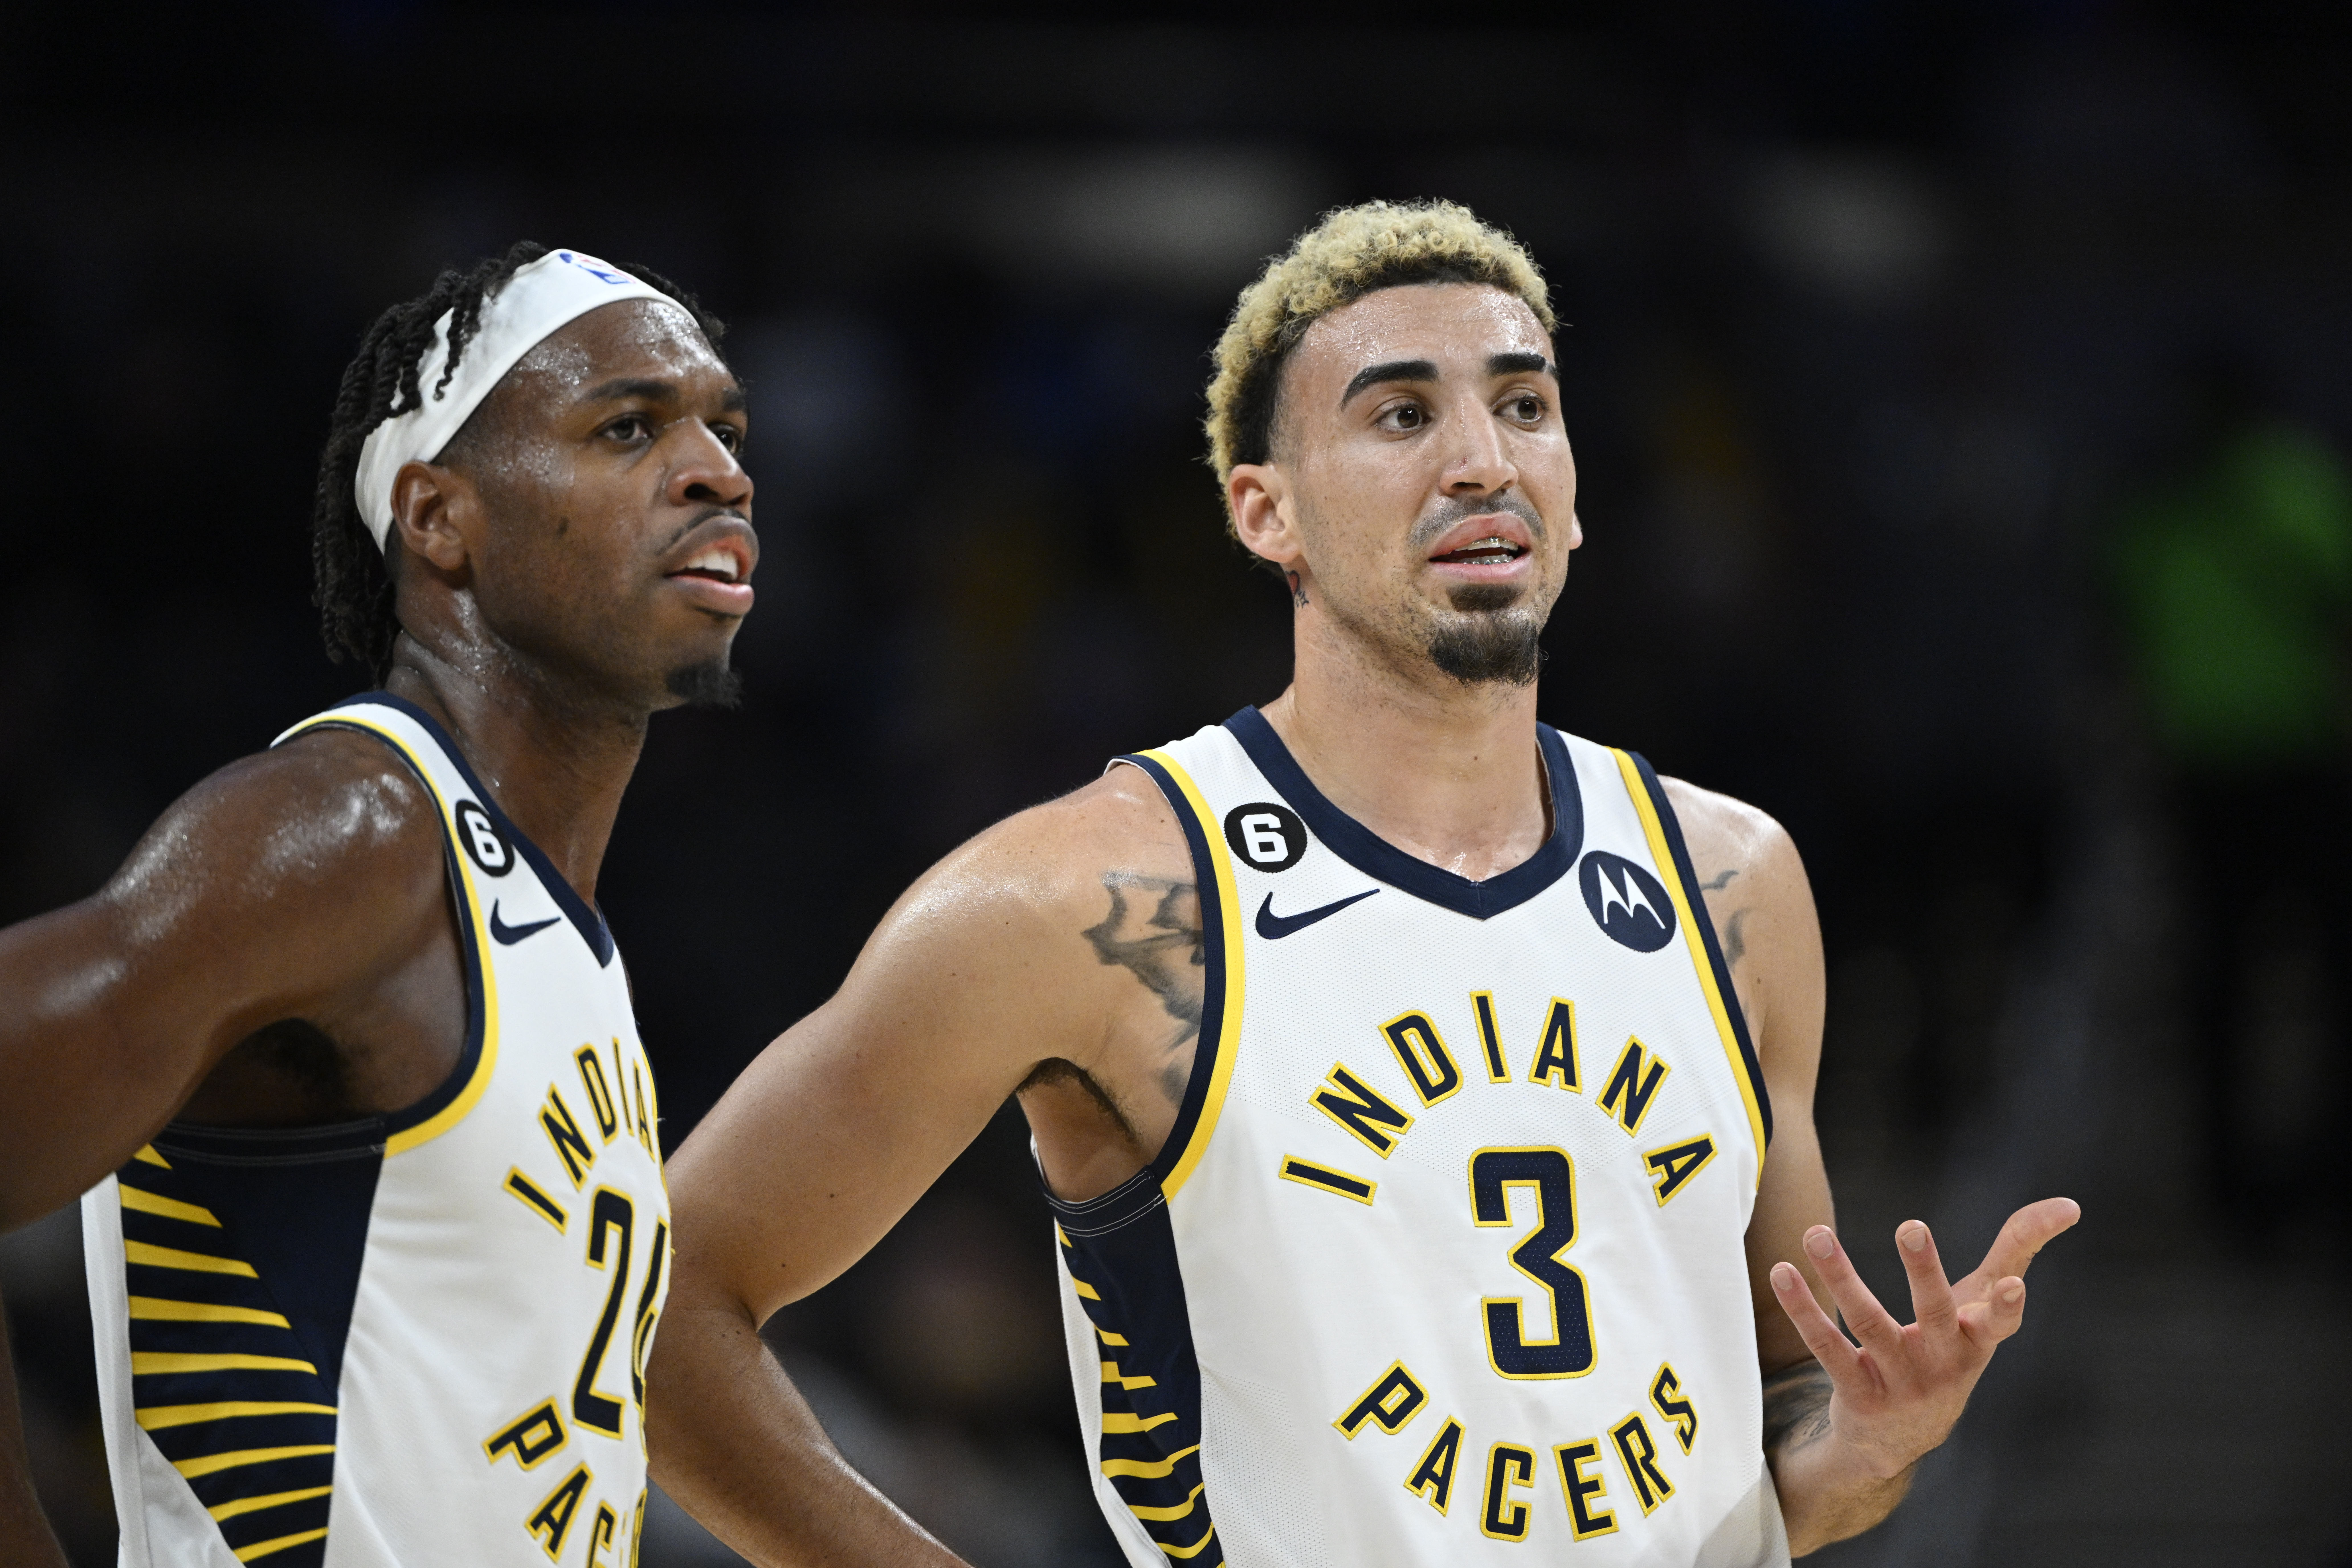 Chris Duarte upgraded to questionable for Indiana Pacers after G League rehab assignment